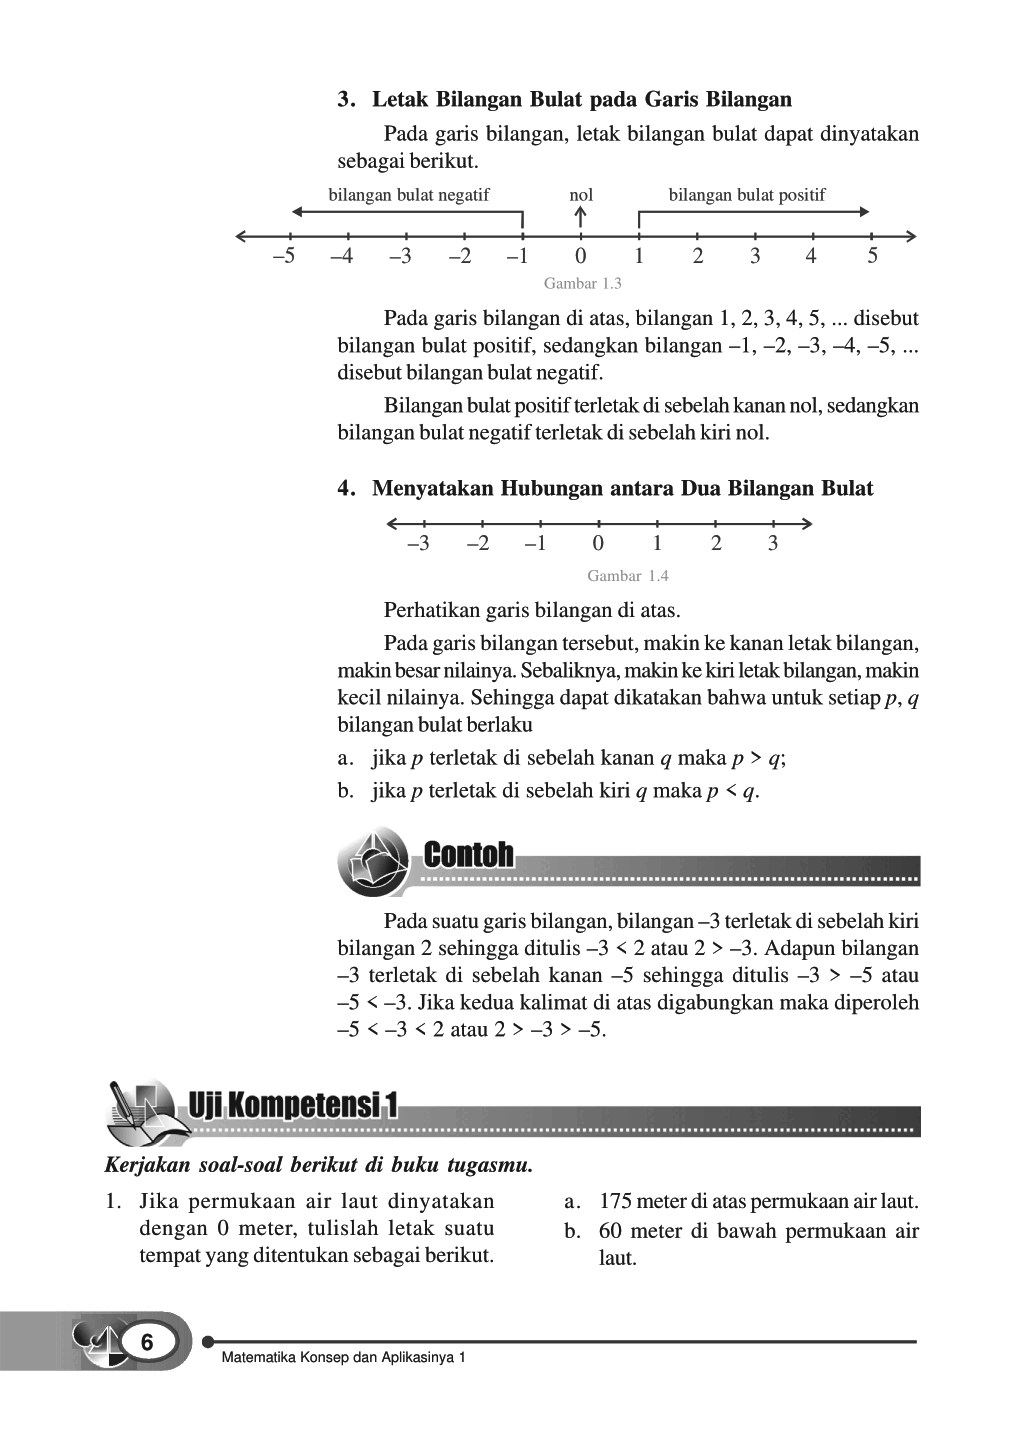 page 15